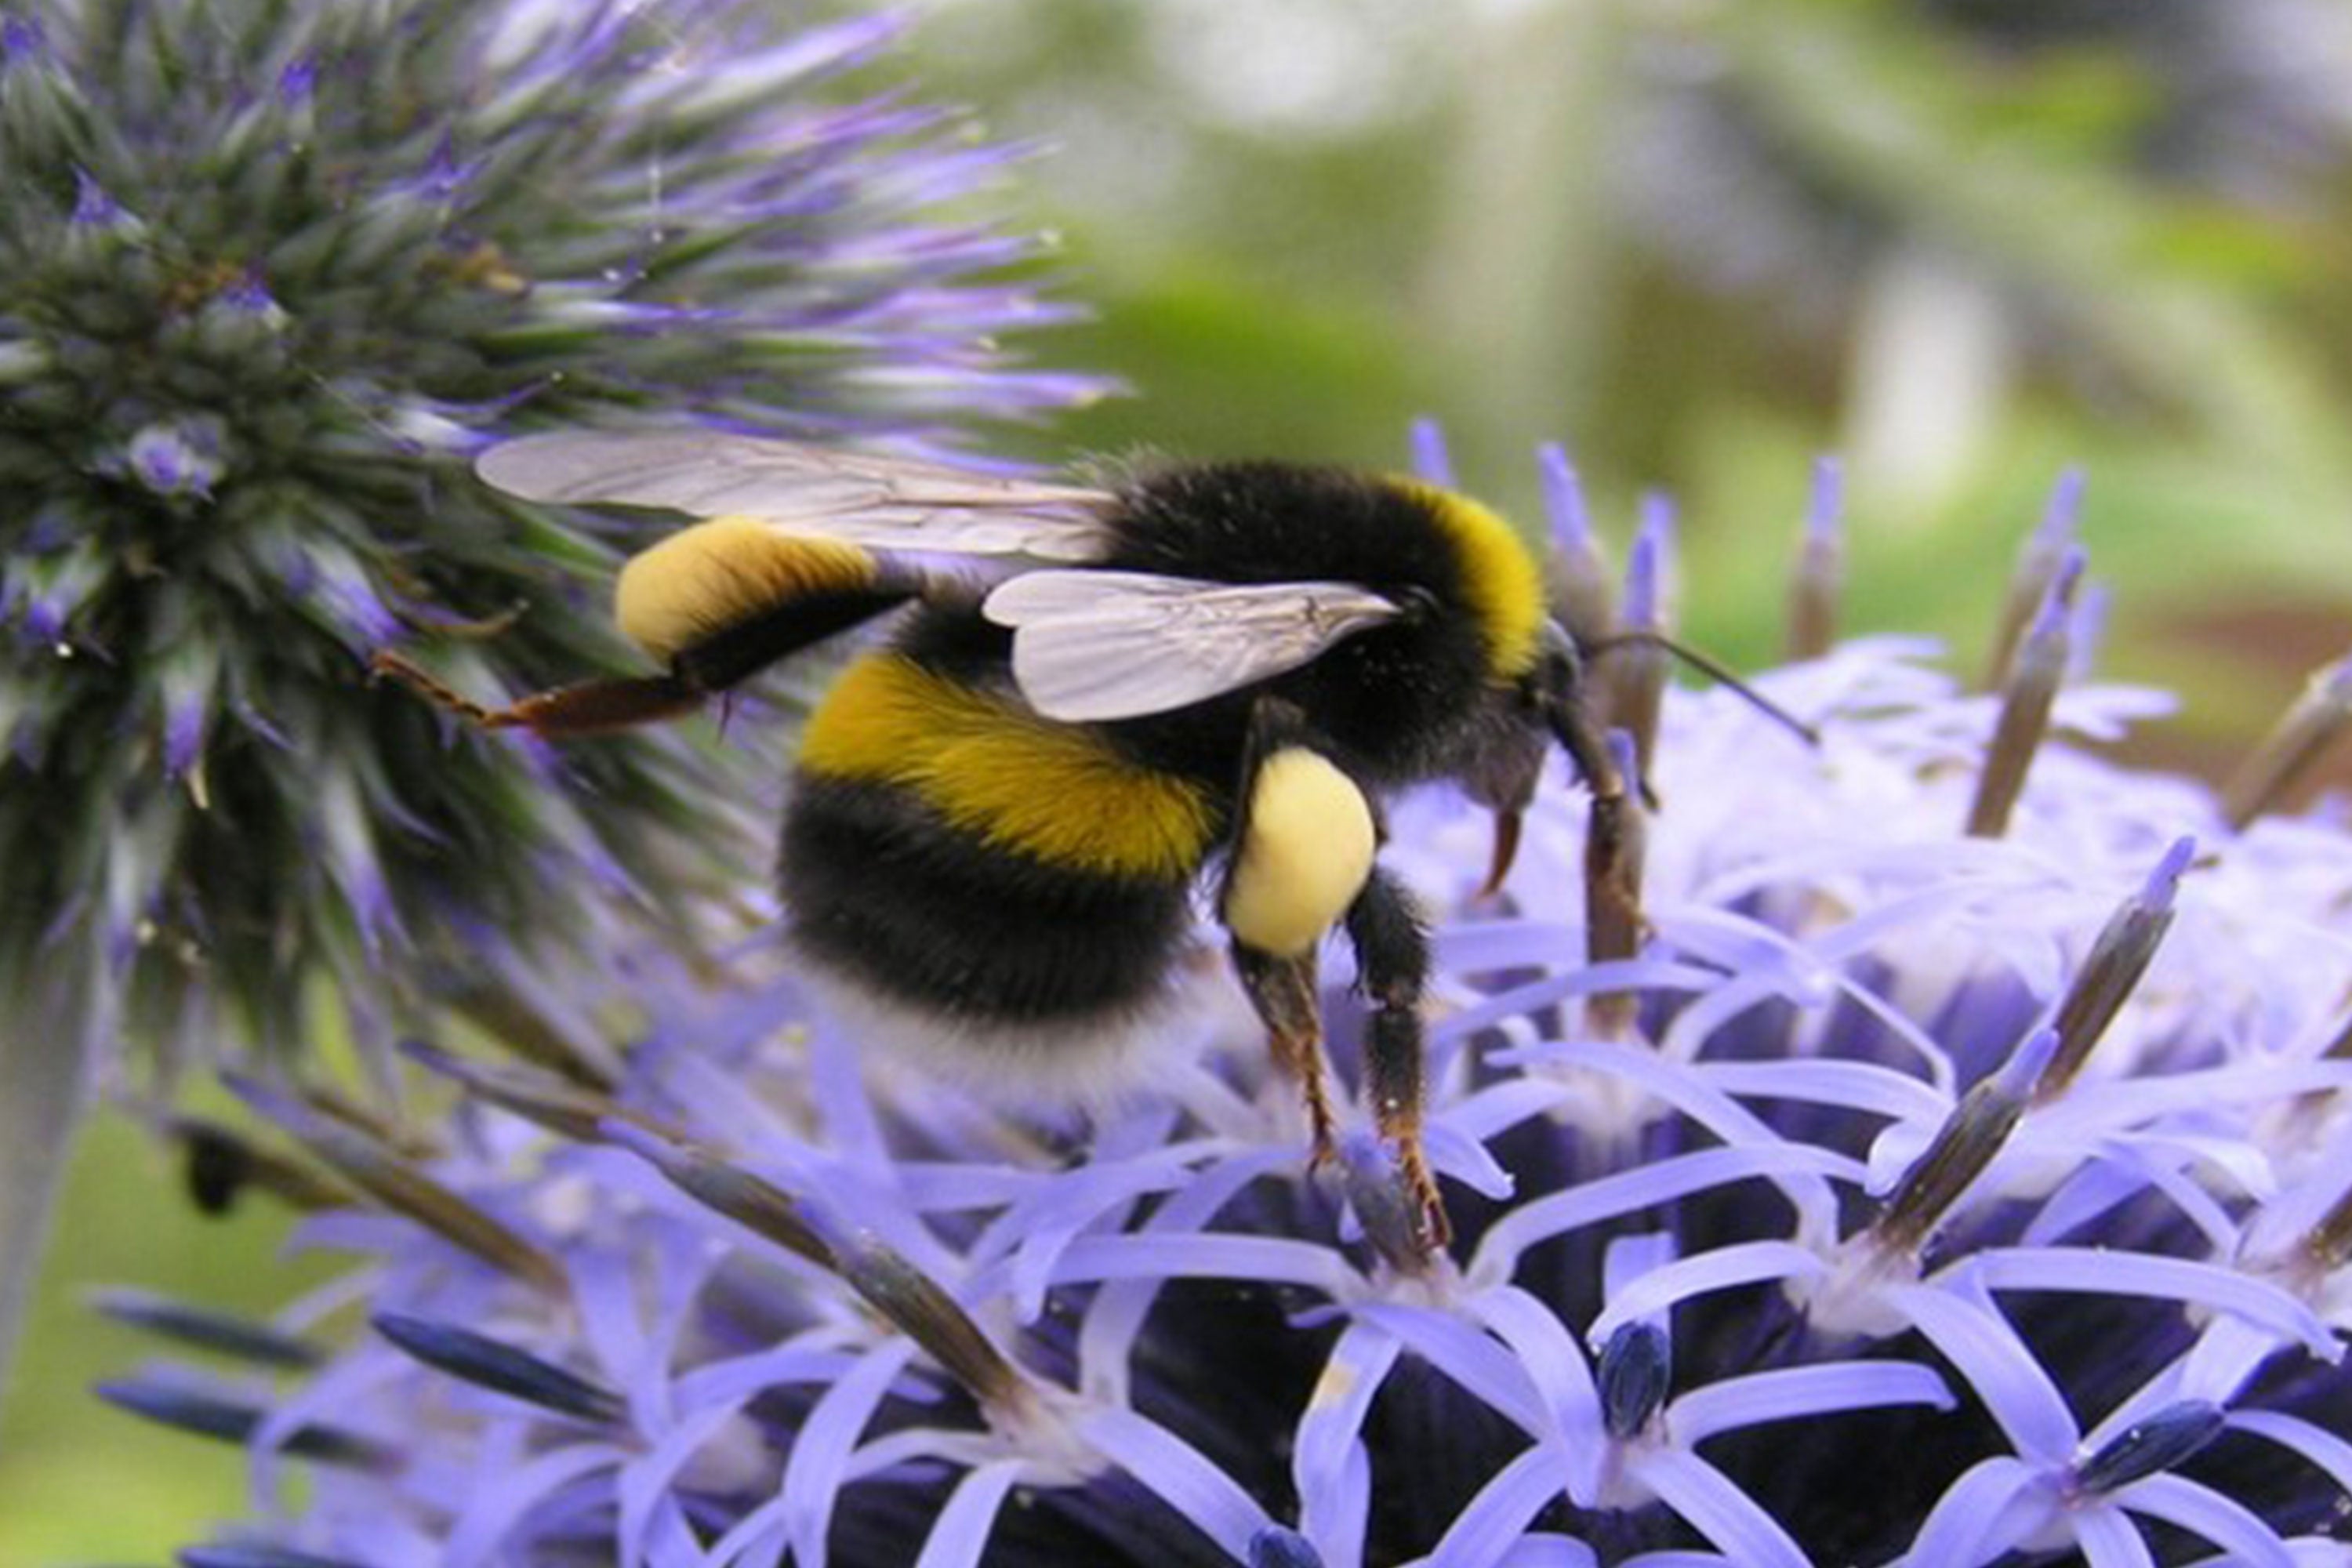 A white tailed bumble bee feeding on a wild flower head